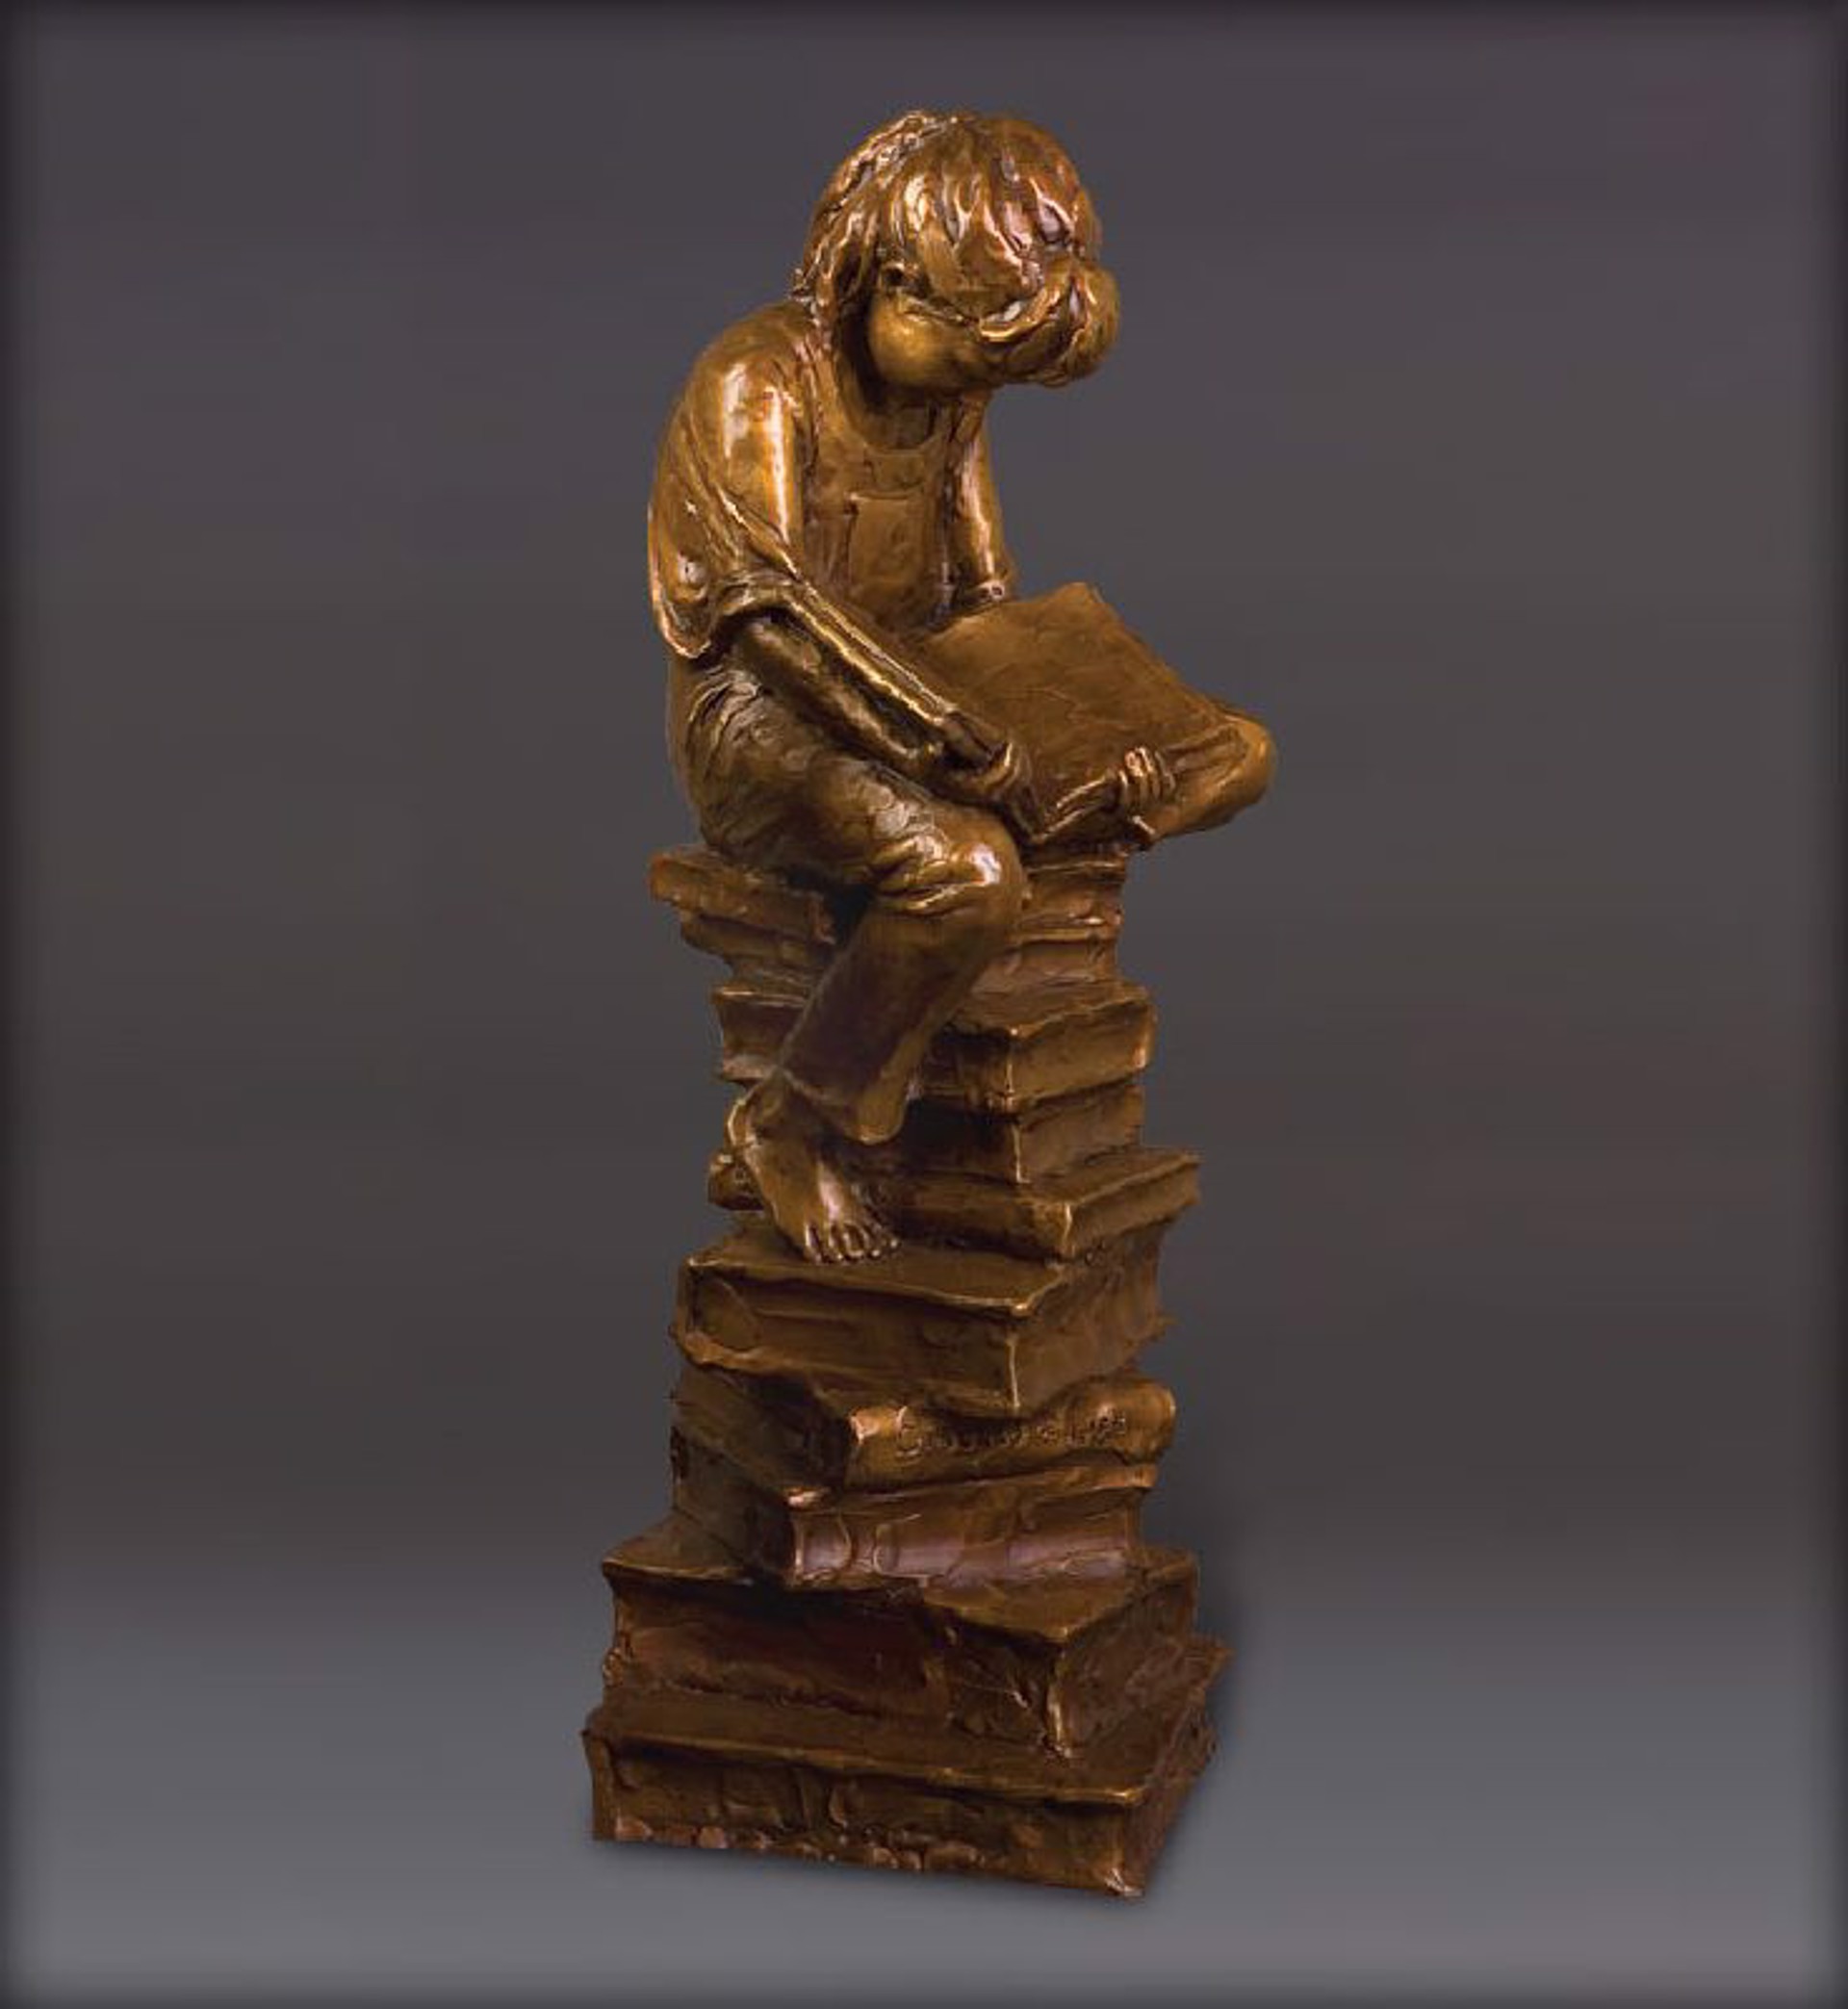 New Heights of Knowledge: One More Chapter by Gary Lee Price (sculptor)